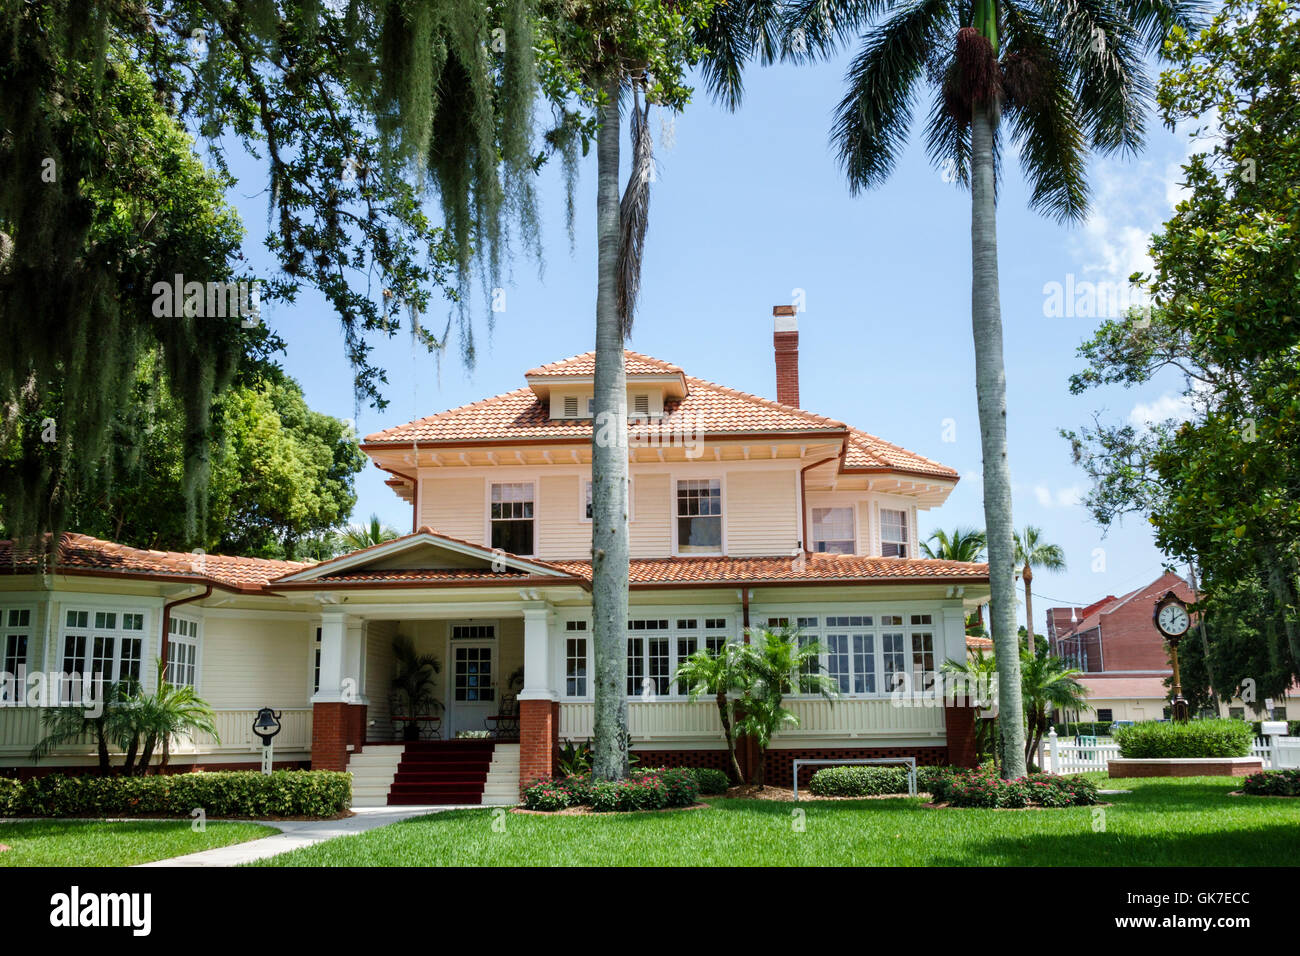 Florida,South,Palmetto,Palmetto River waterside Bed and Breakfast,historic home,landmark,1913,guesthouse,exterior,garden,Sea waterrs Catalog Home,kit Stock Photo